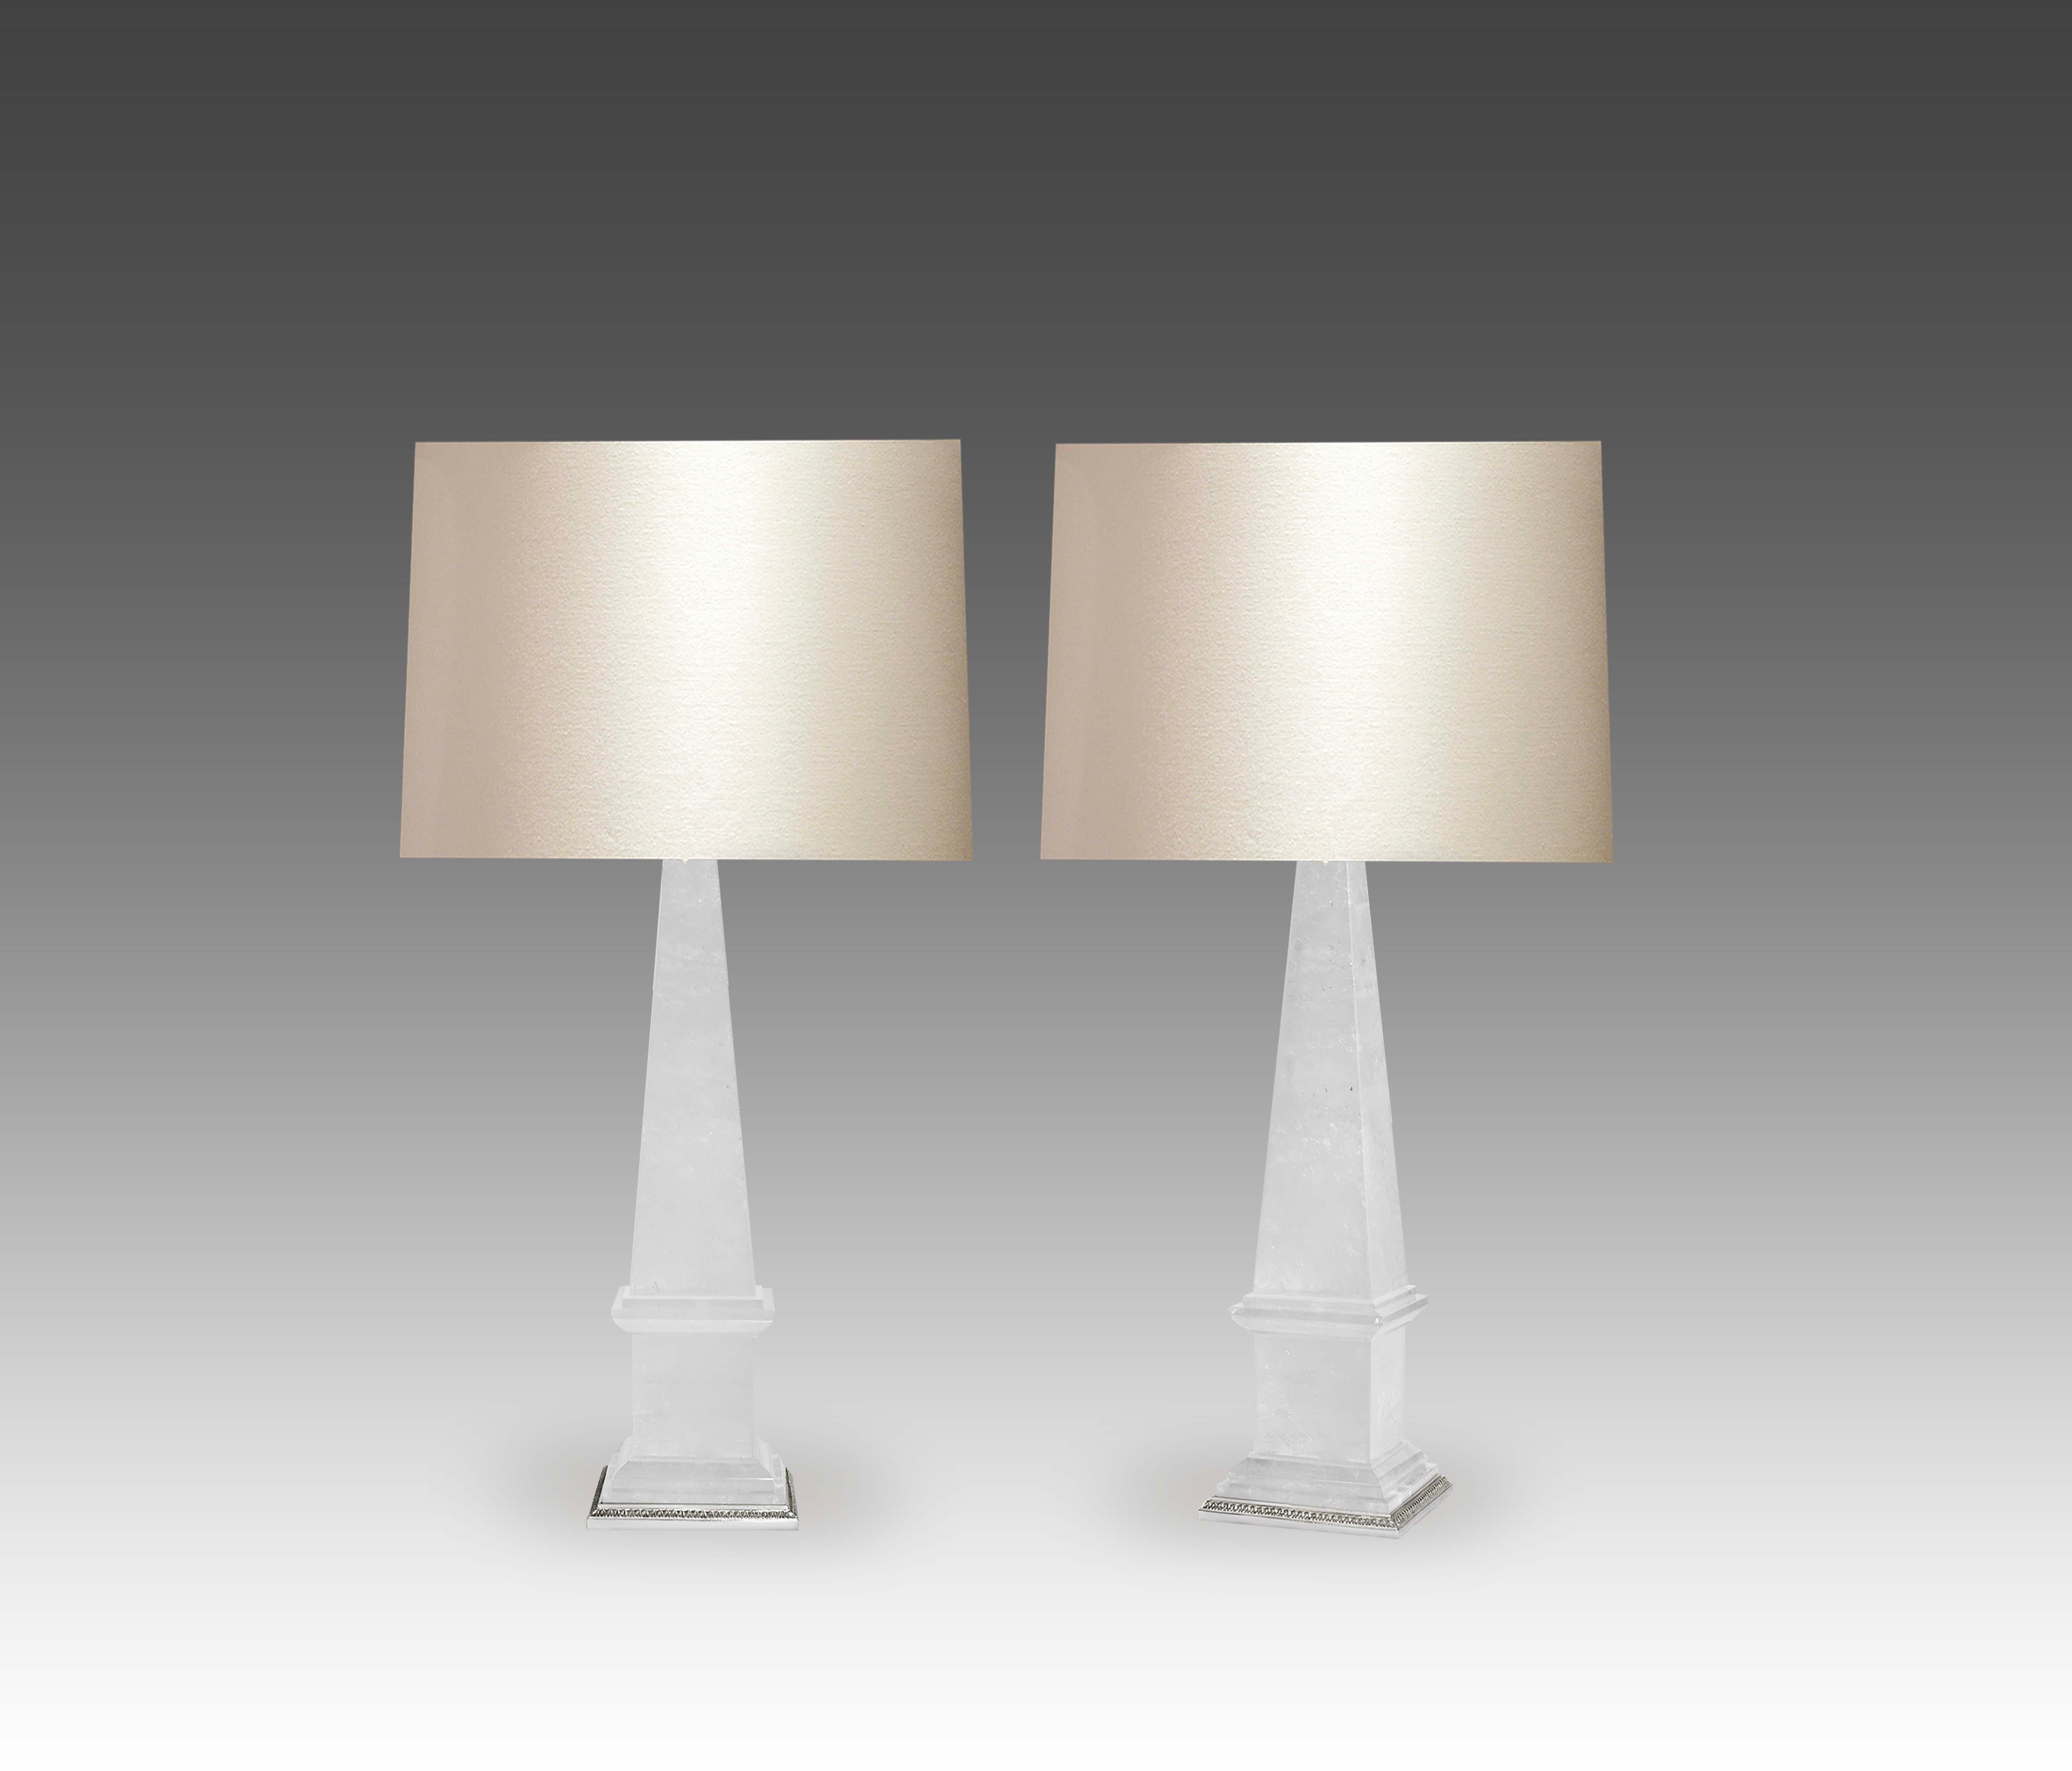 A pair of obelisk rock crystal lamps with Fine castled polished nickel bases. Created by Phoenix Gallery.
Each lamp installs two sockets.
To the top of the rock crystal: 25